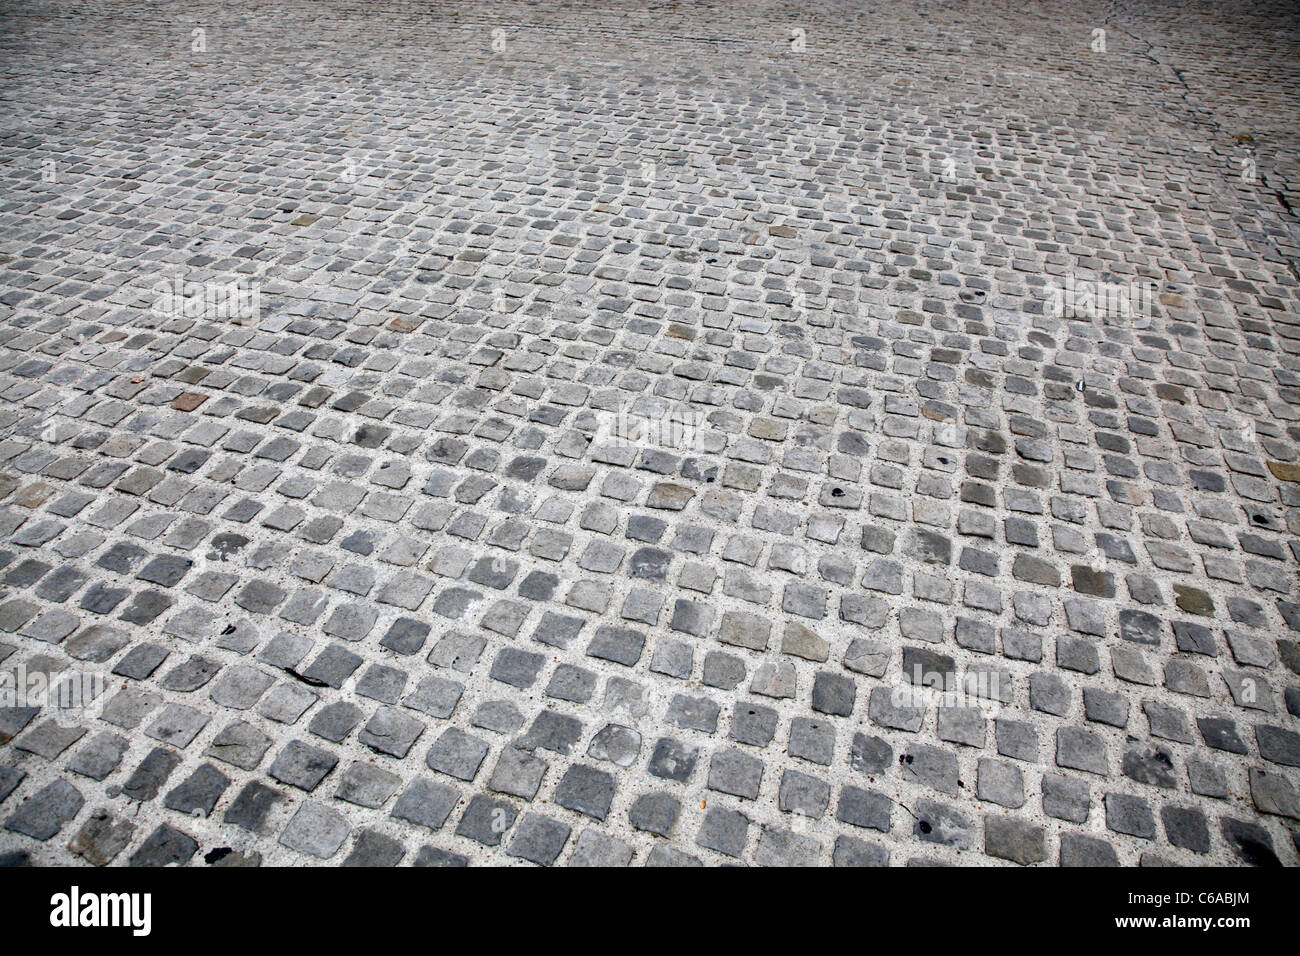 Cobbles on a cobbled street in Paris, France Stock Photo